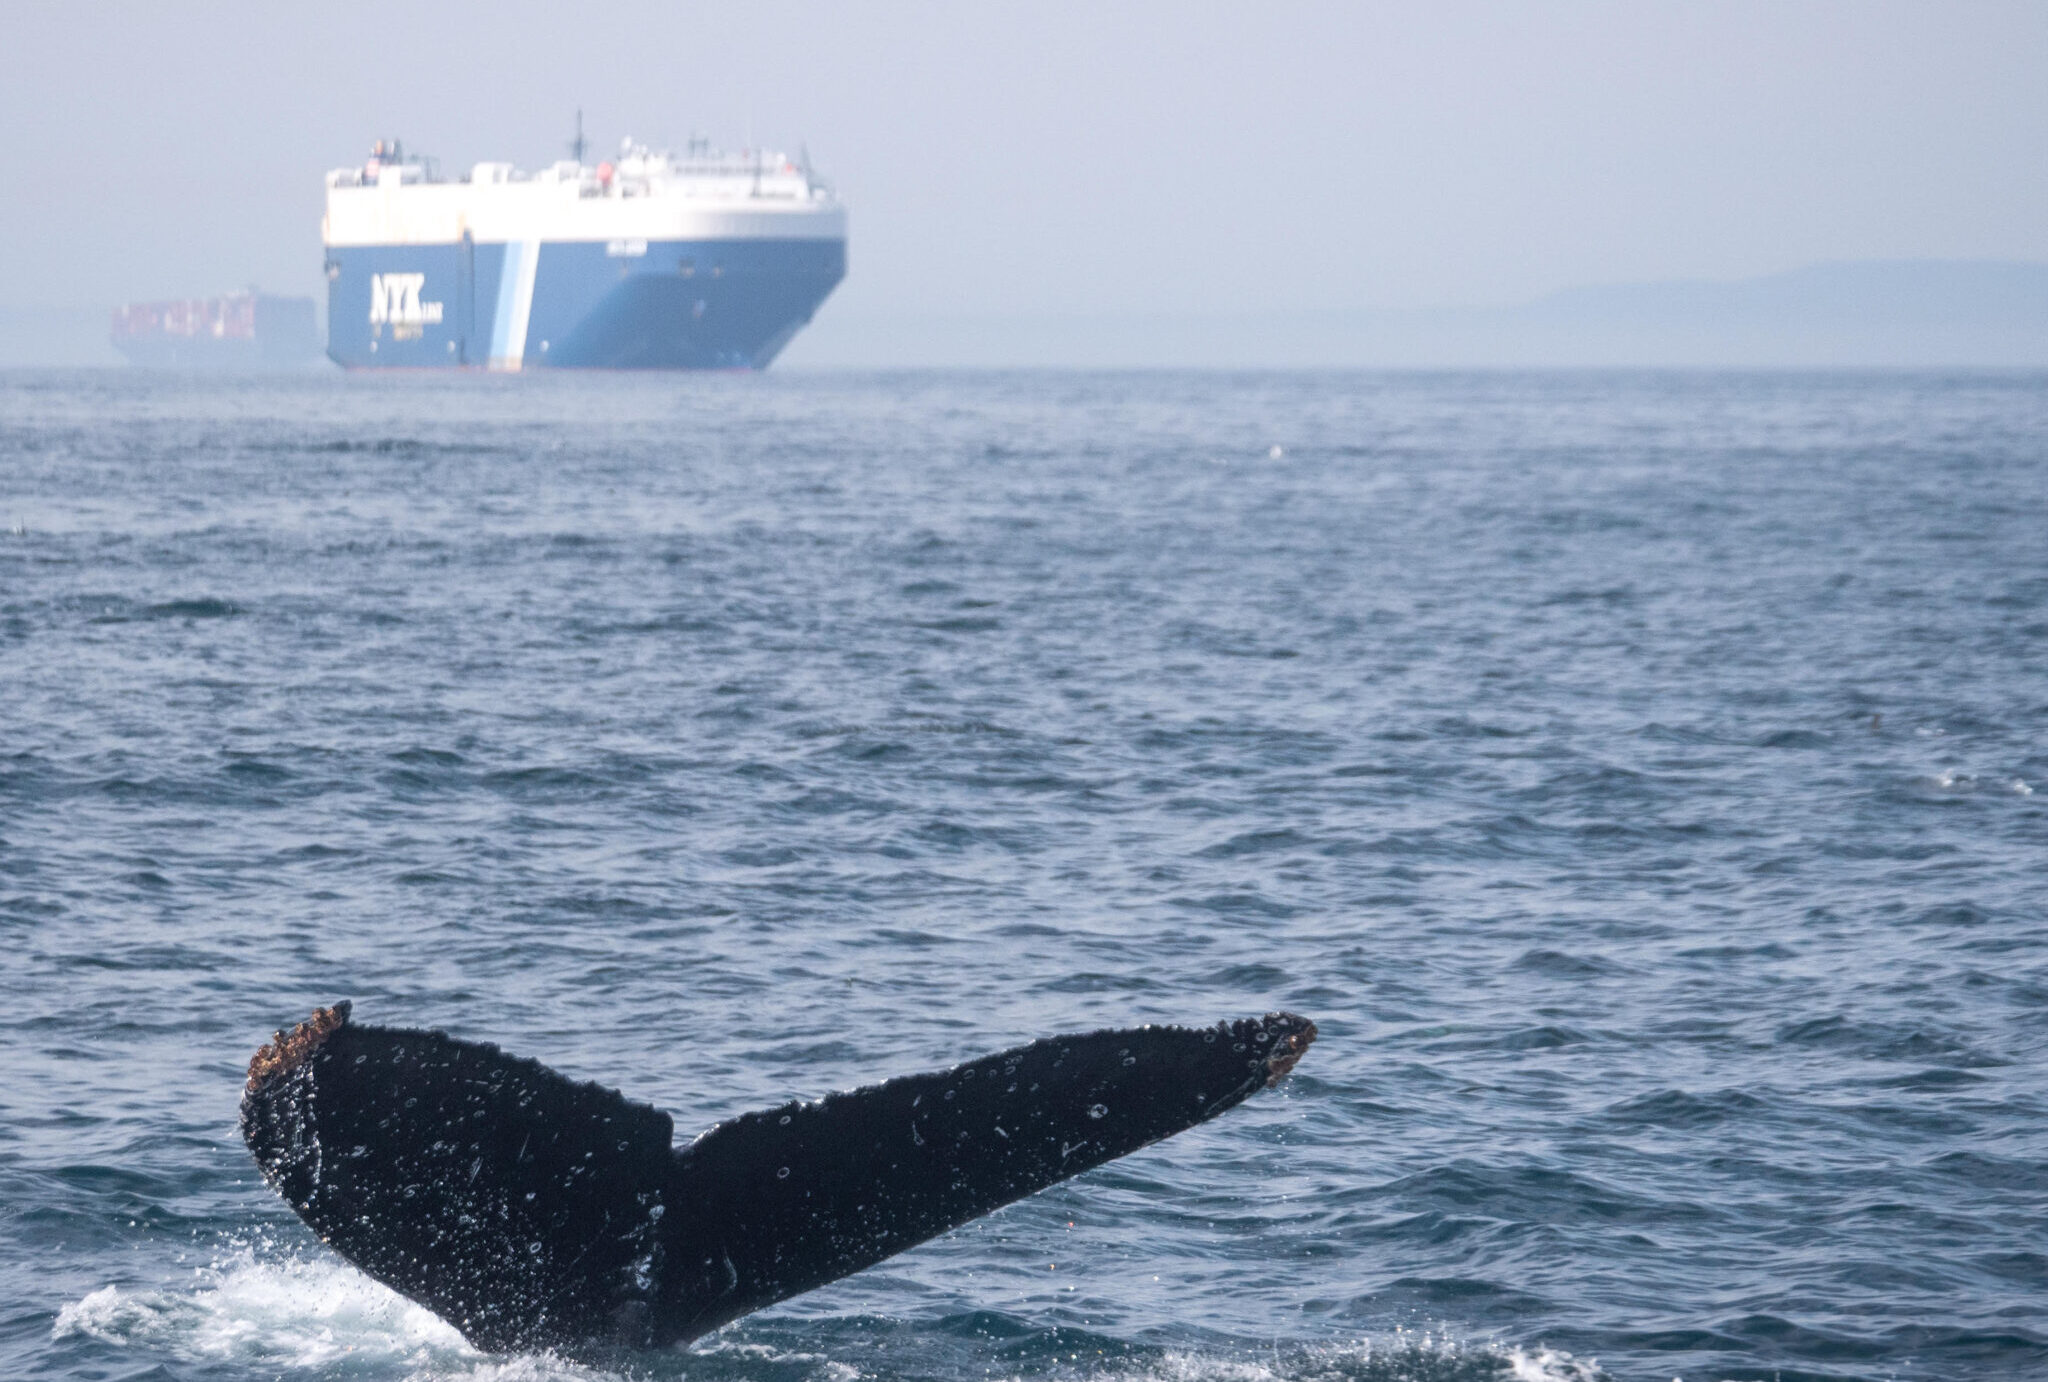 Whale tail visible above water with an approaching ship.